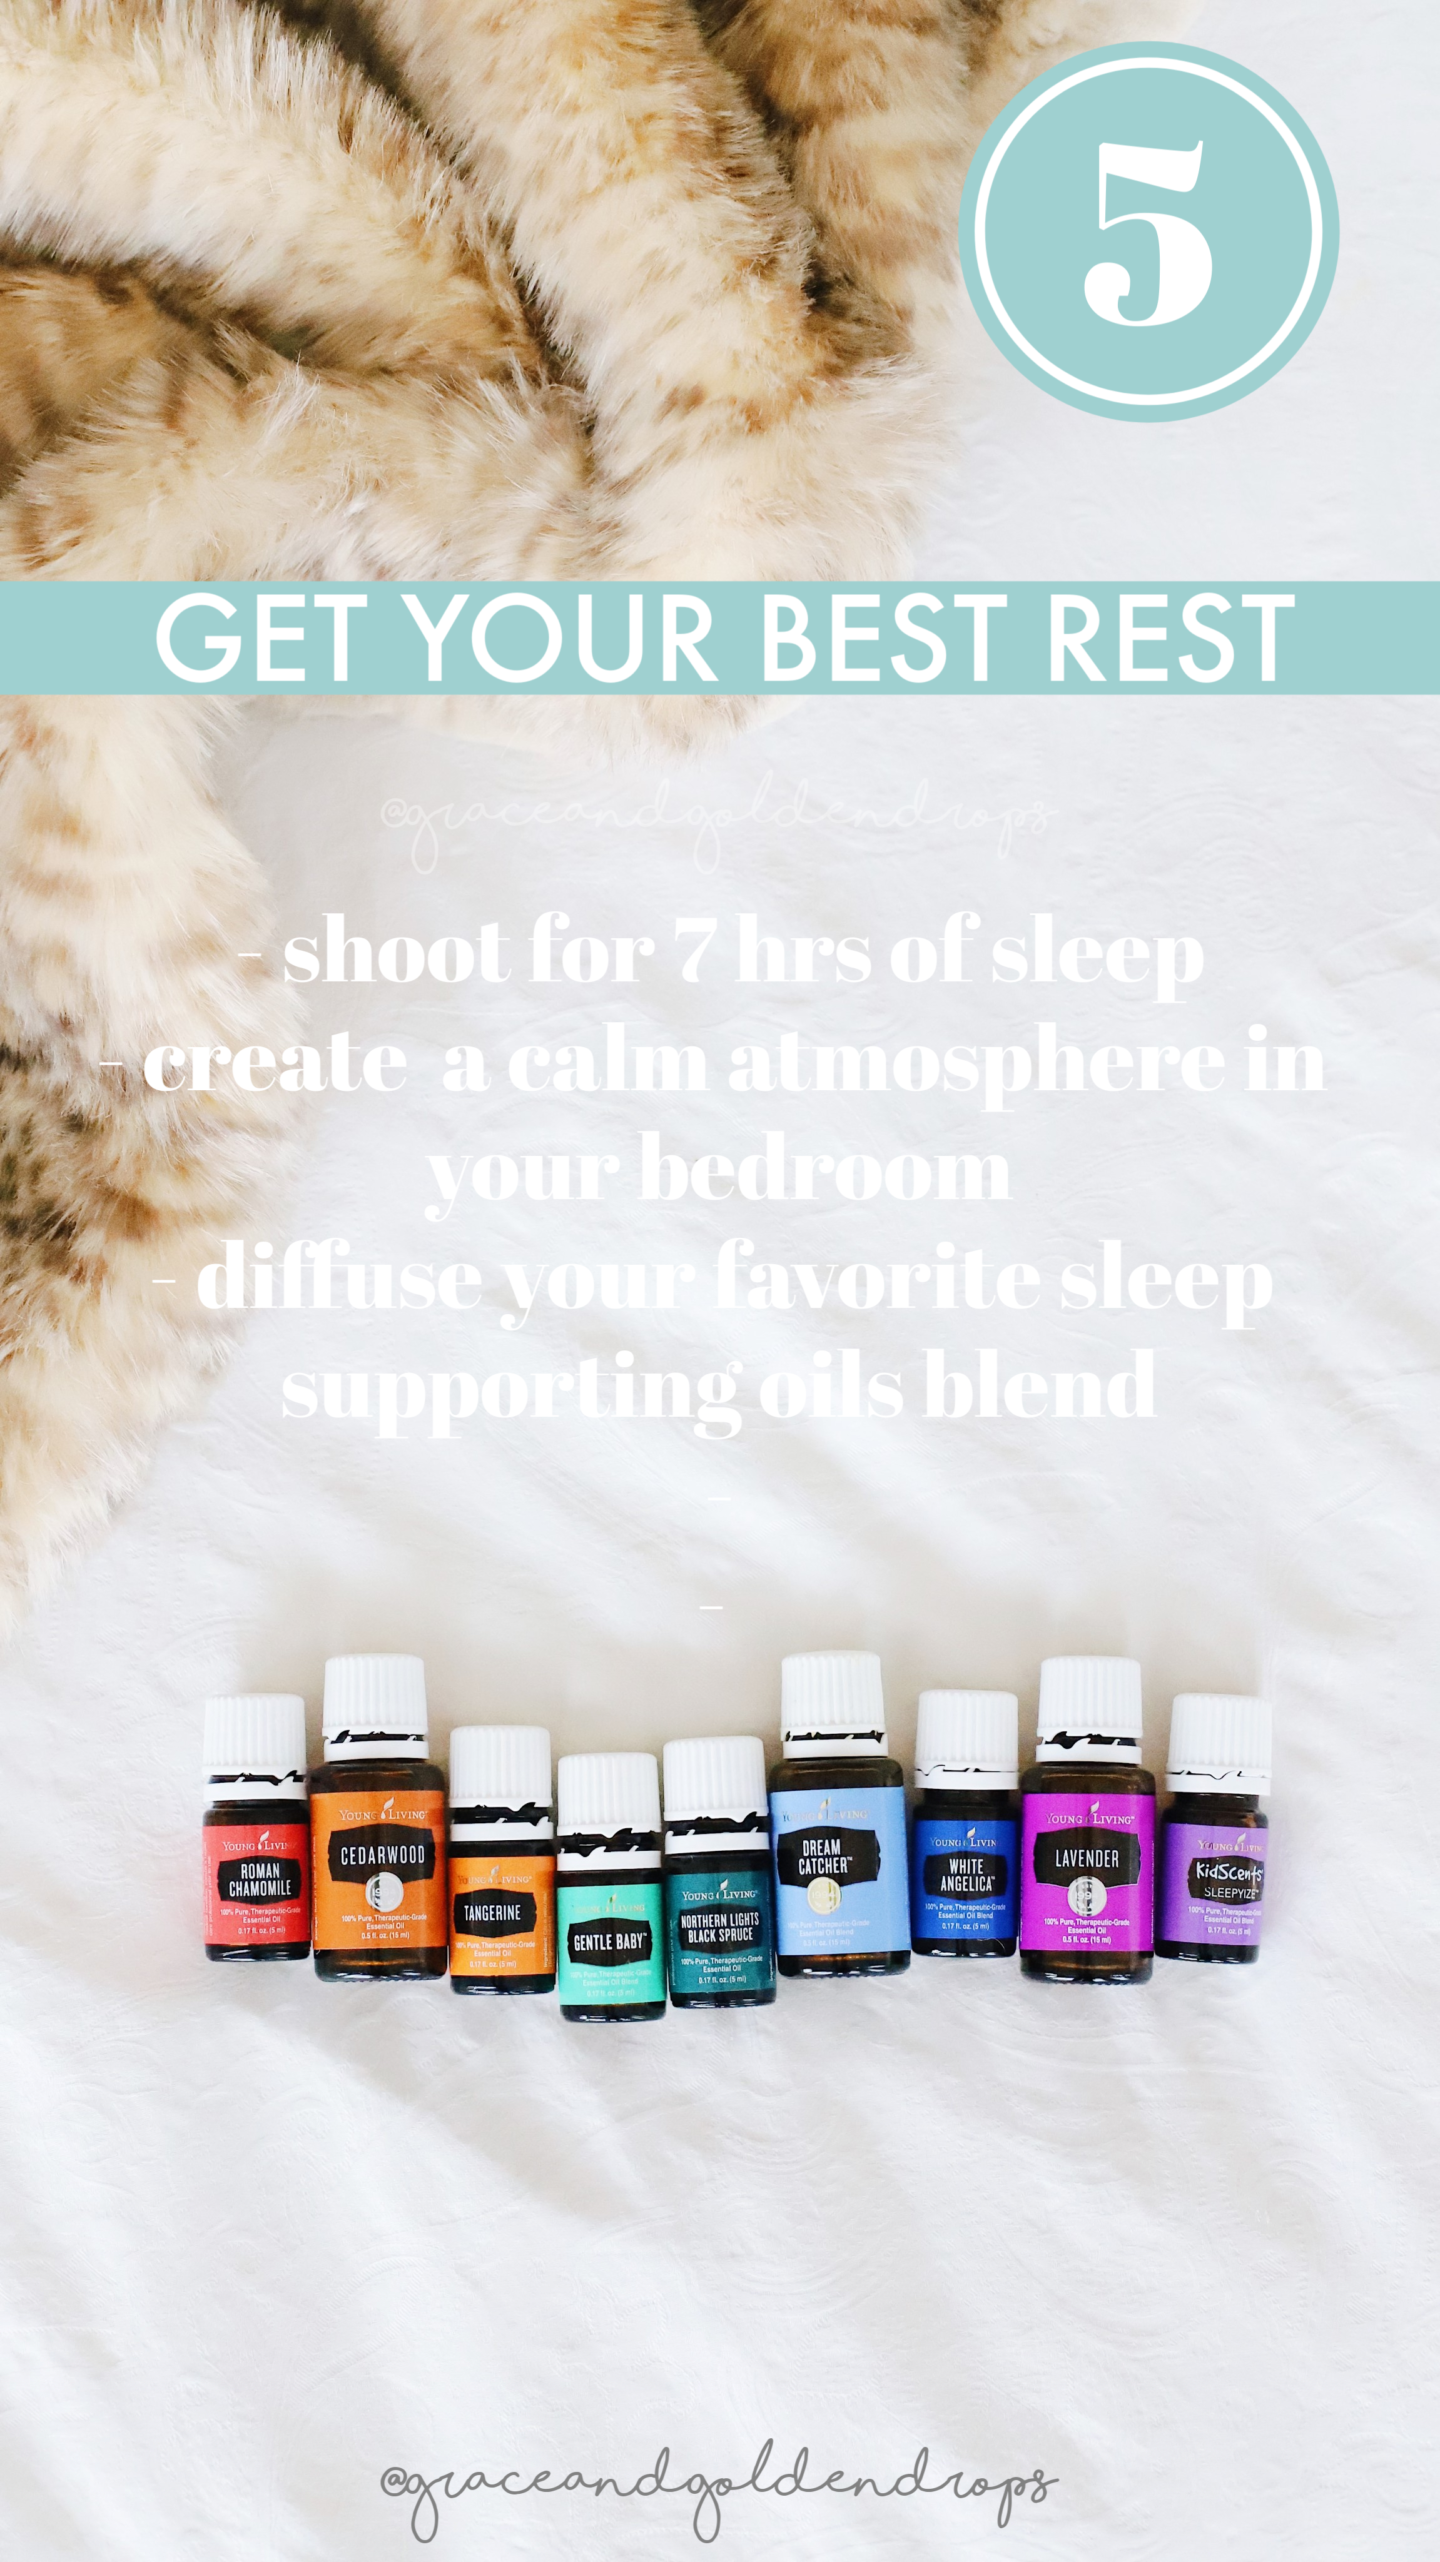 How we can survive and thrive this winter with natural remedies using essential oils and all natural products! Tips for your best rest!